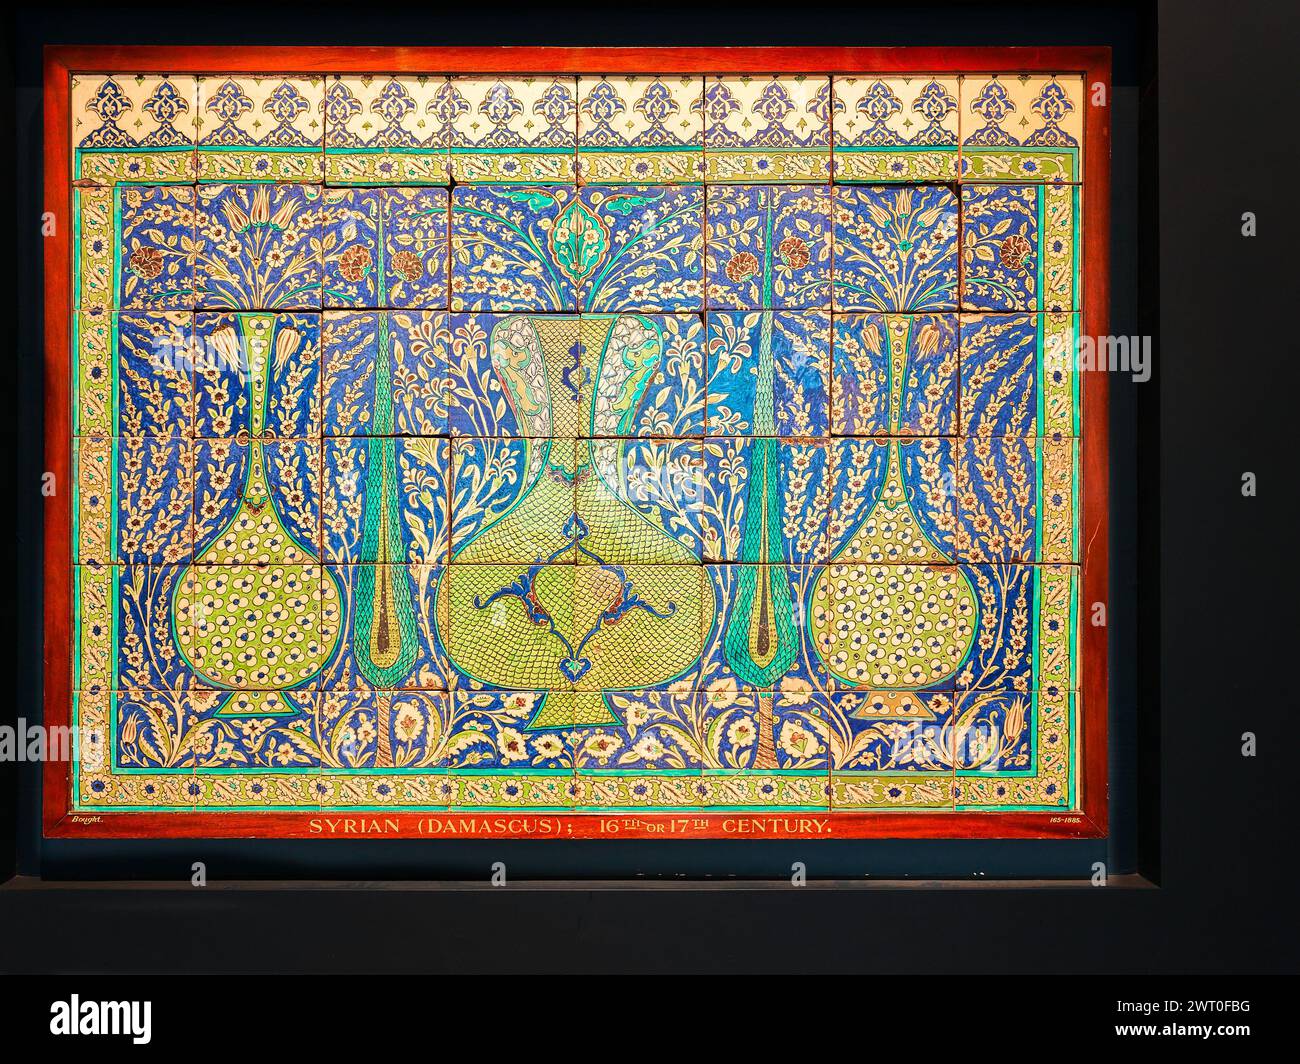 Tiles, muslim art from middle east, about 1650. Stock Photo